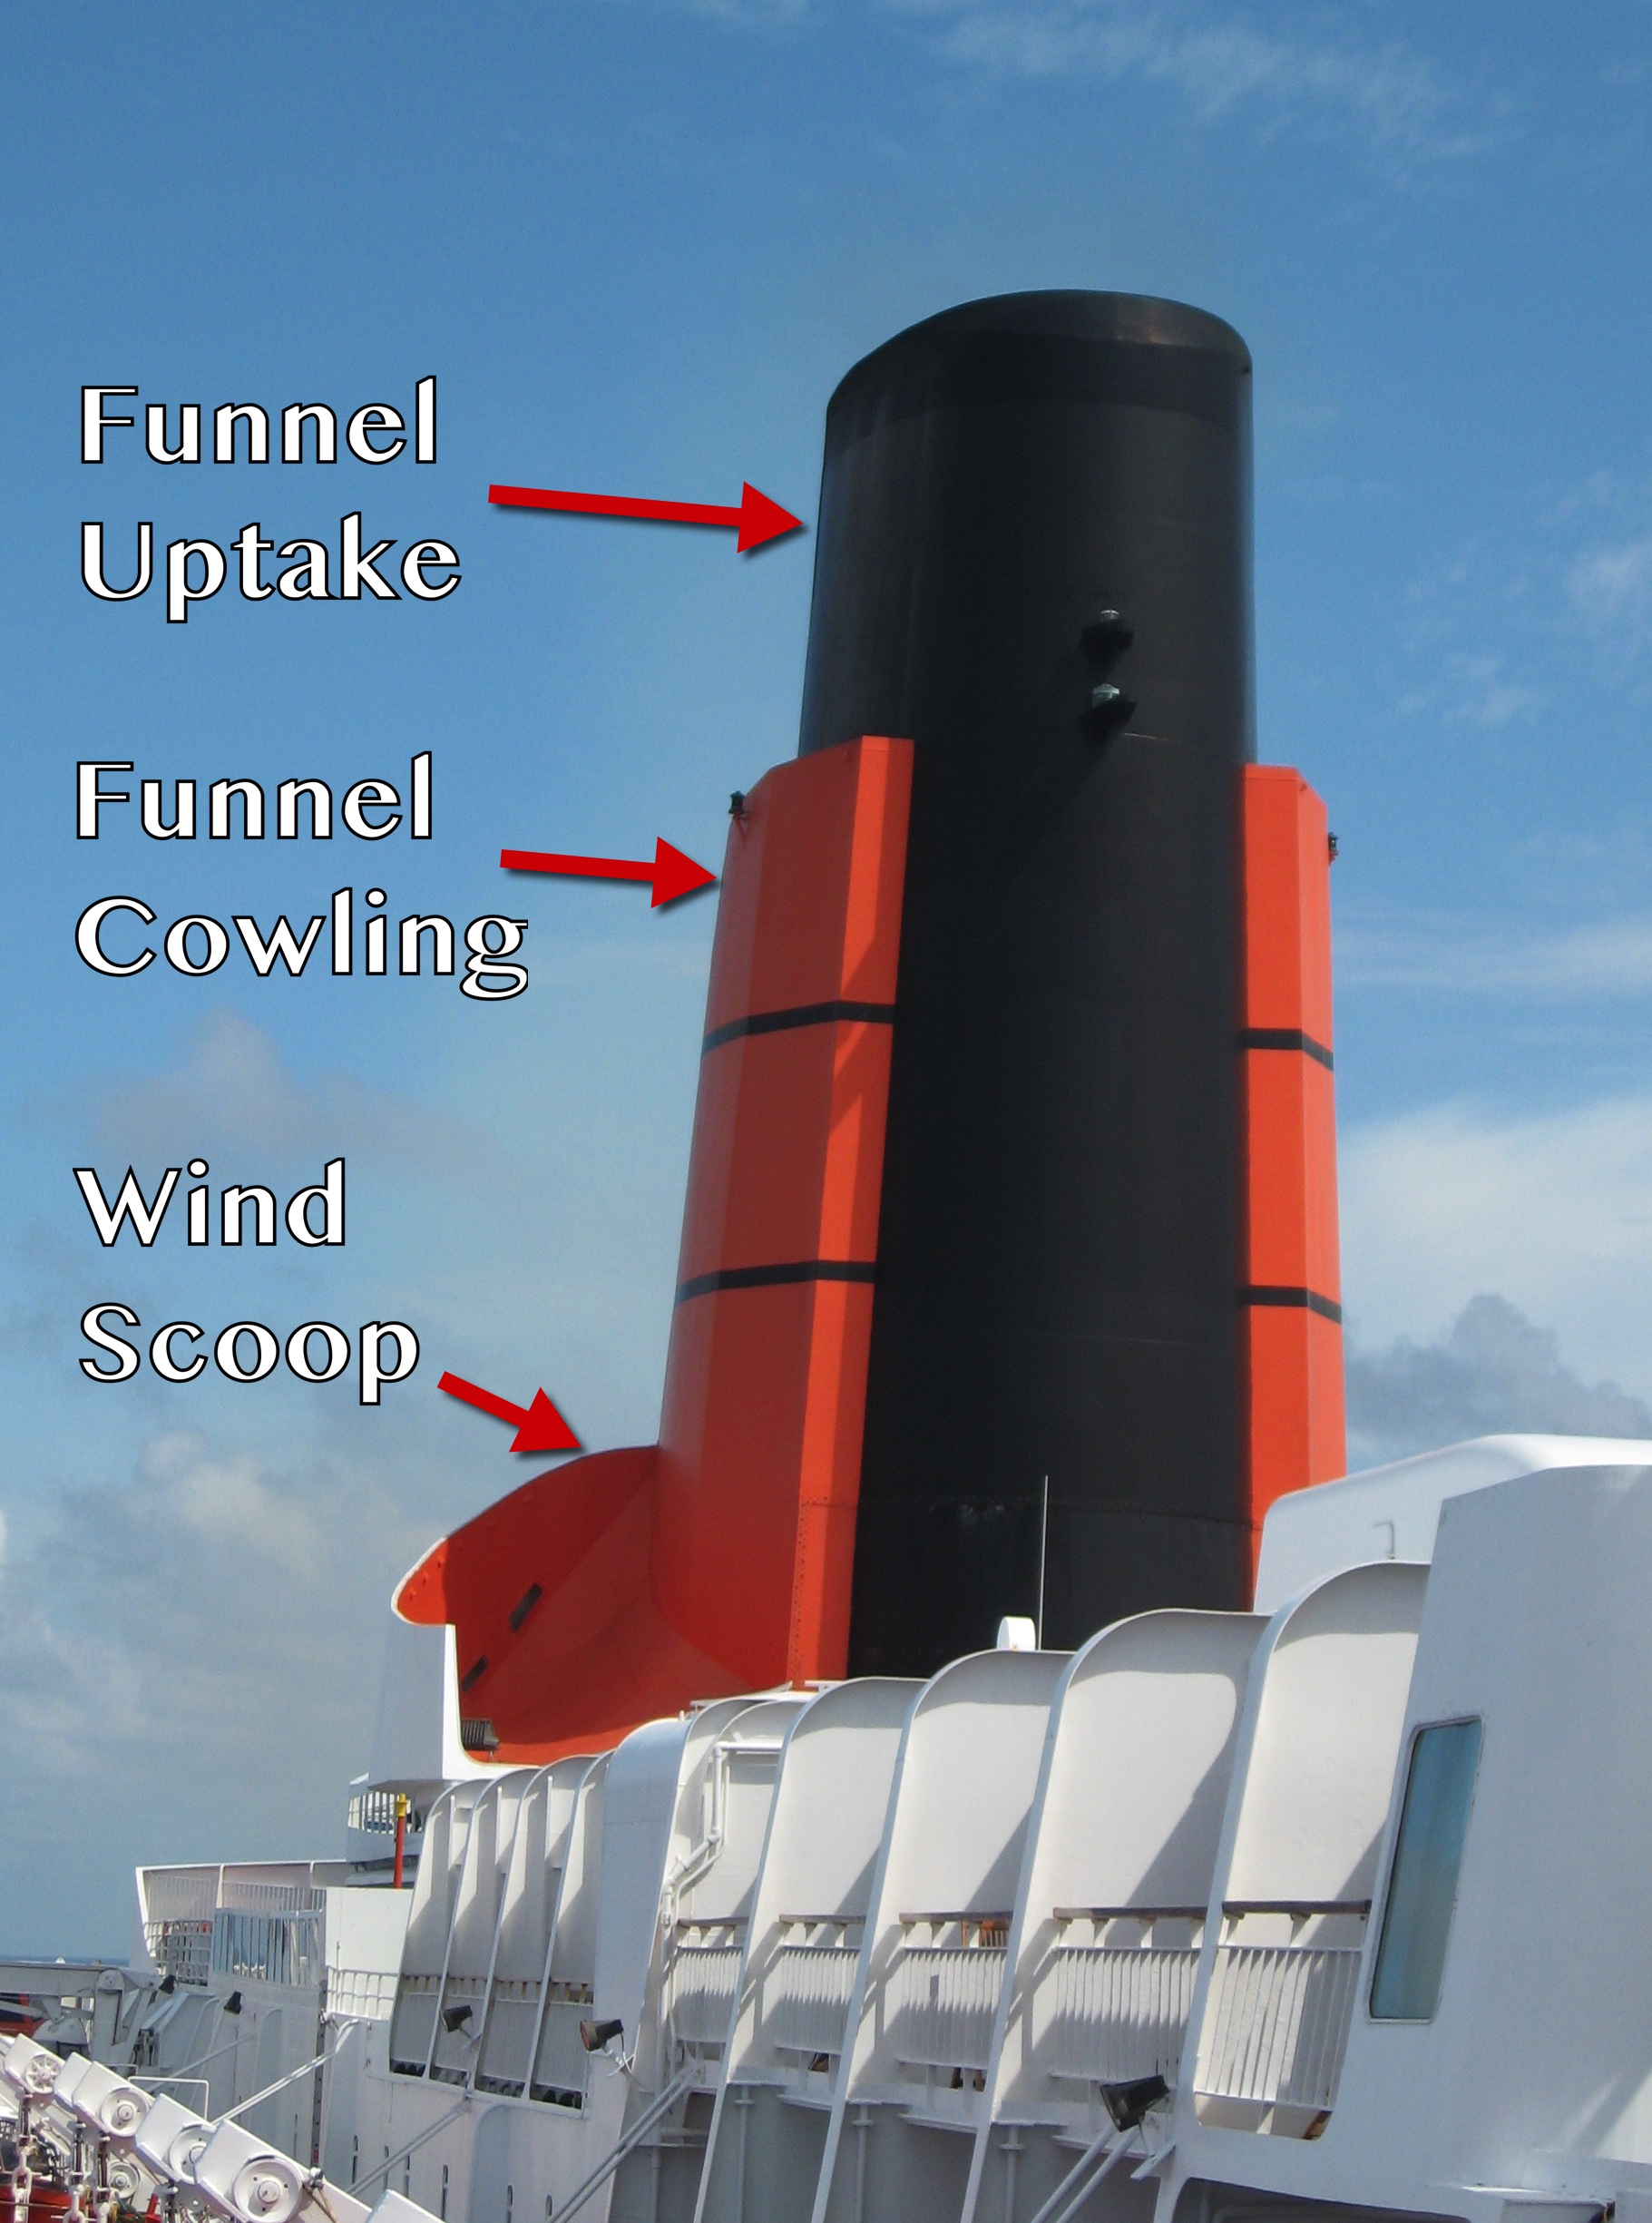 Cunard Funnel Design Expkained